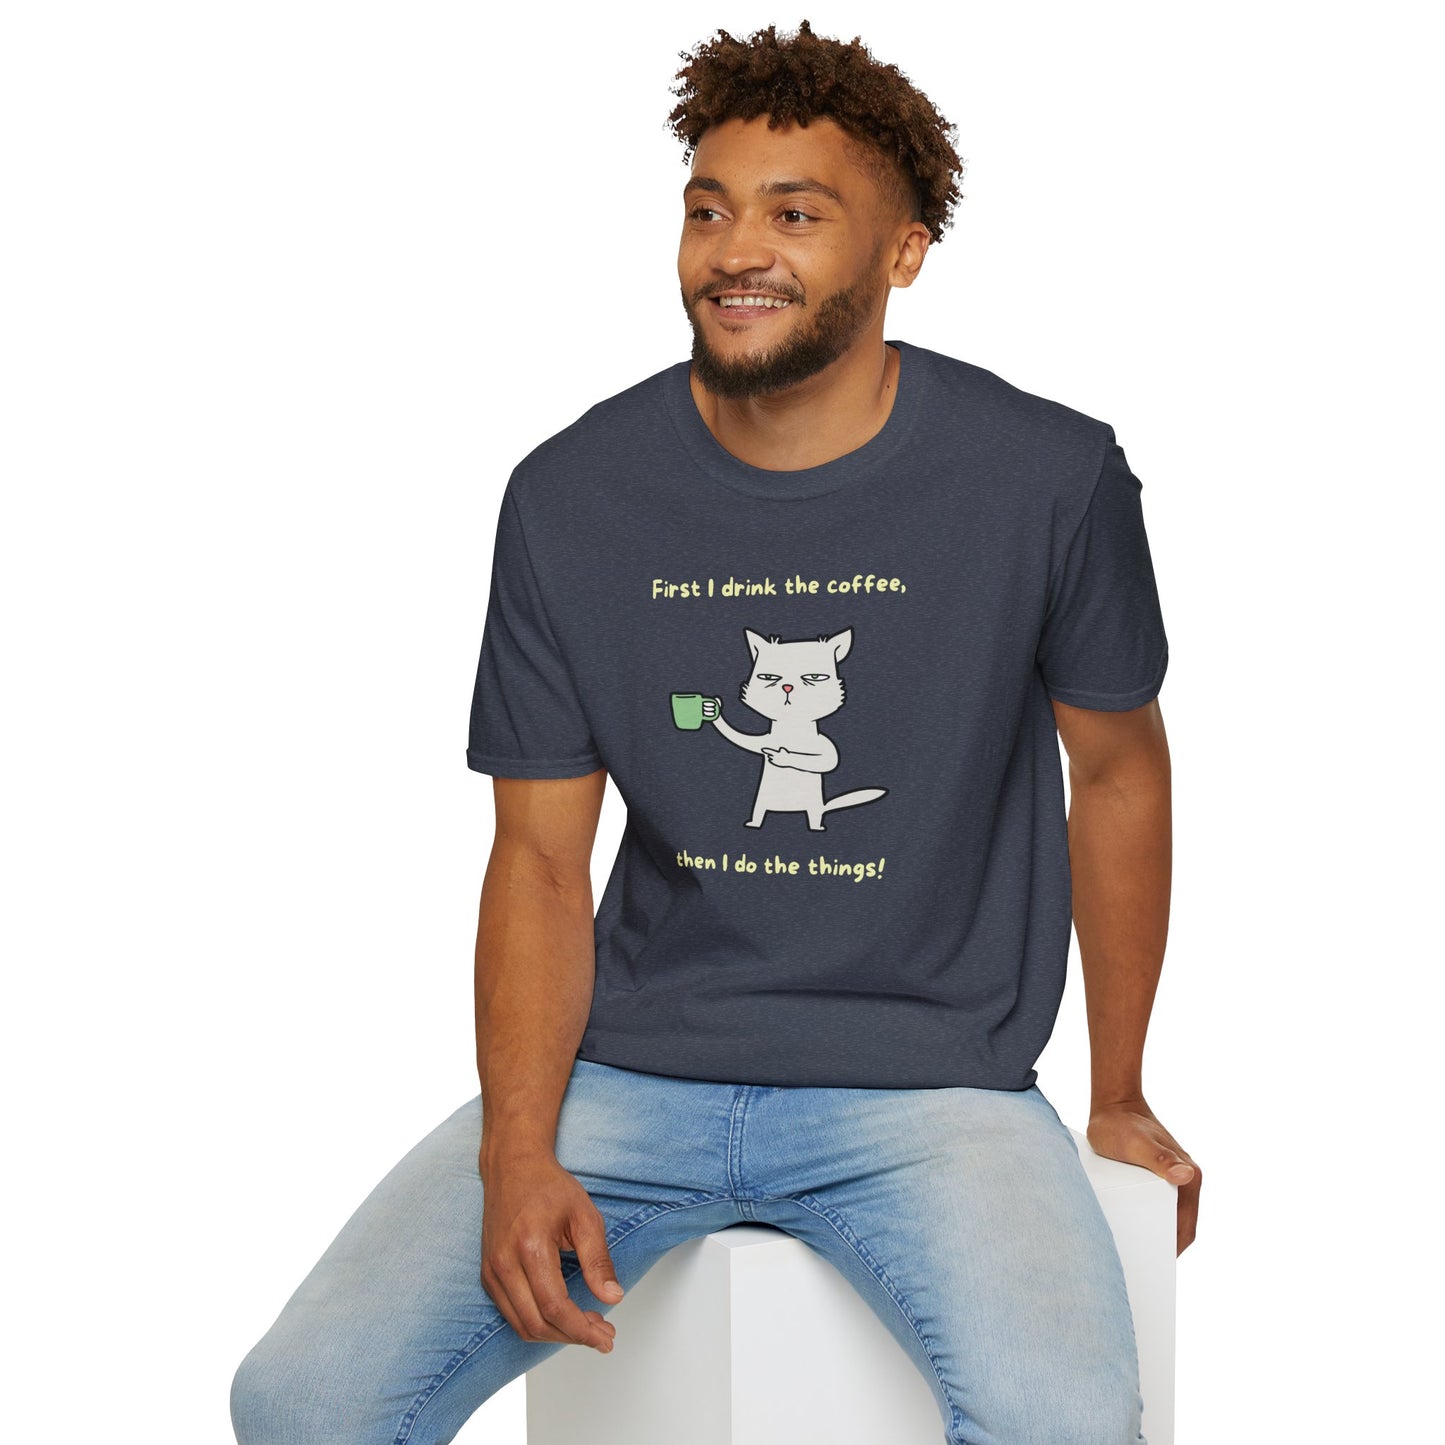 Cats and Coffee - Unisex - Softstyle T-Shirt